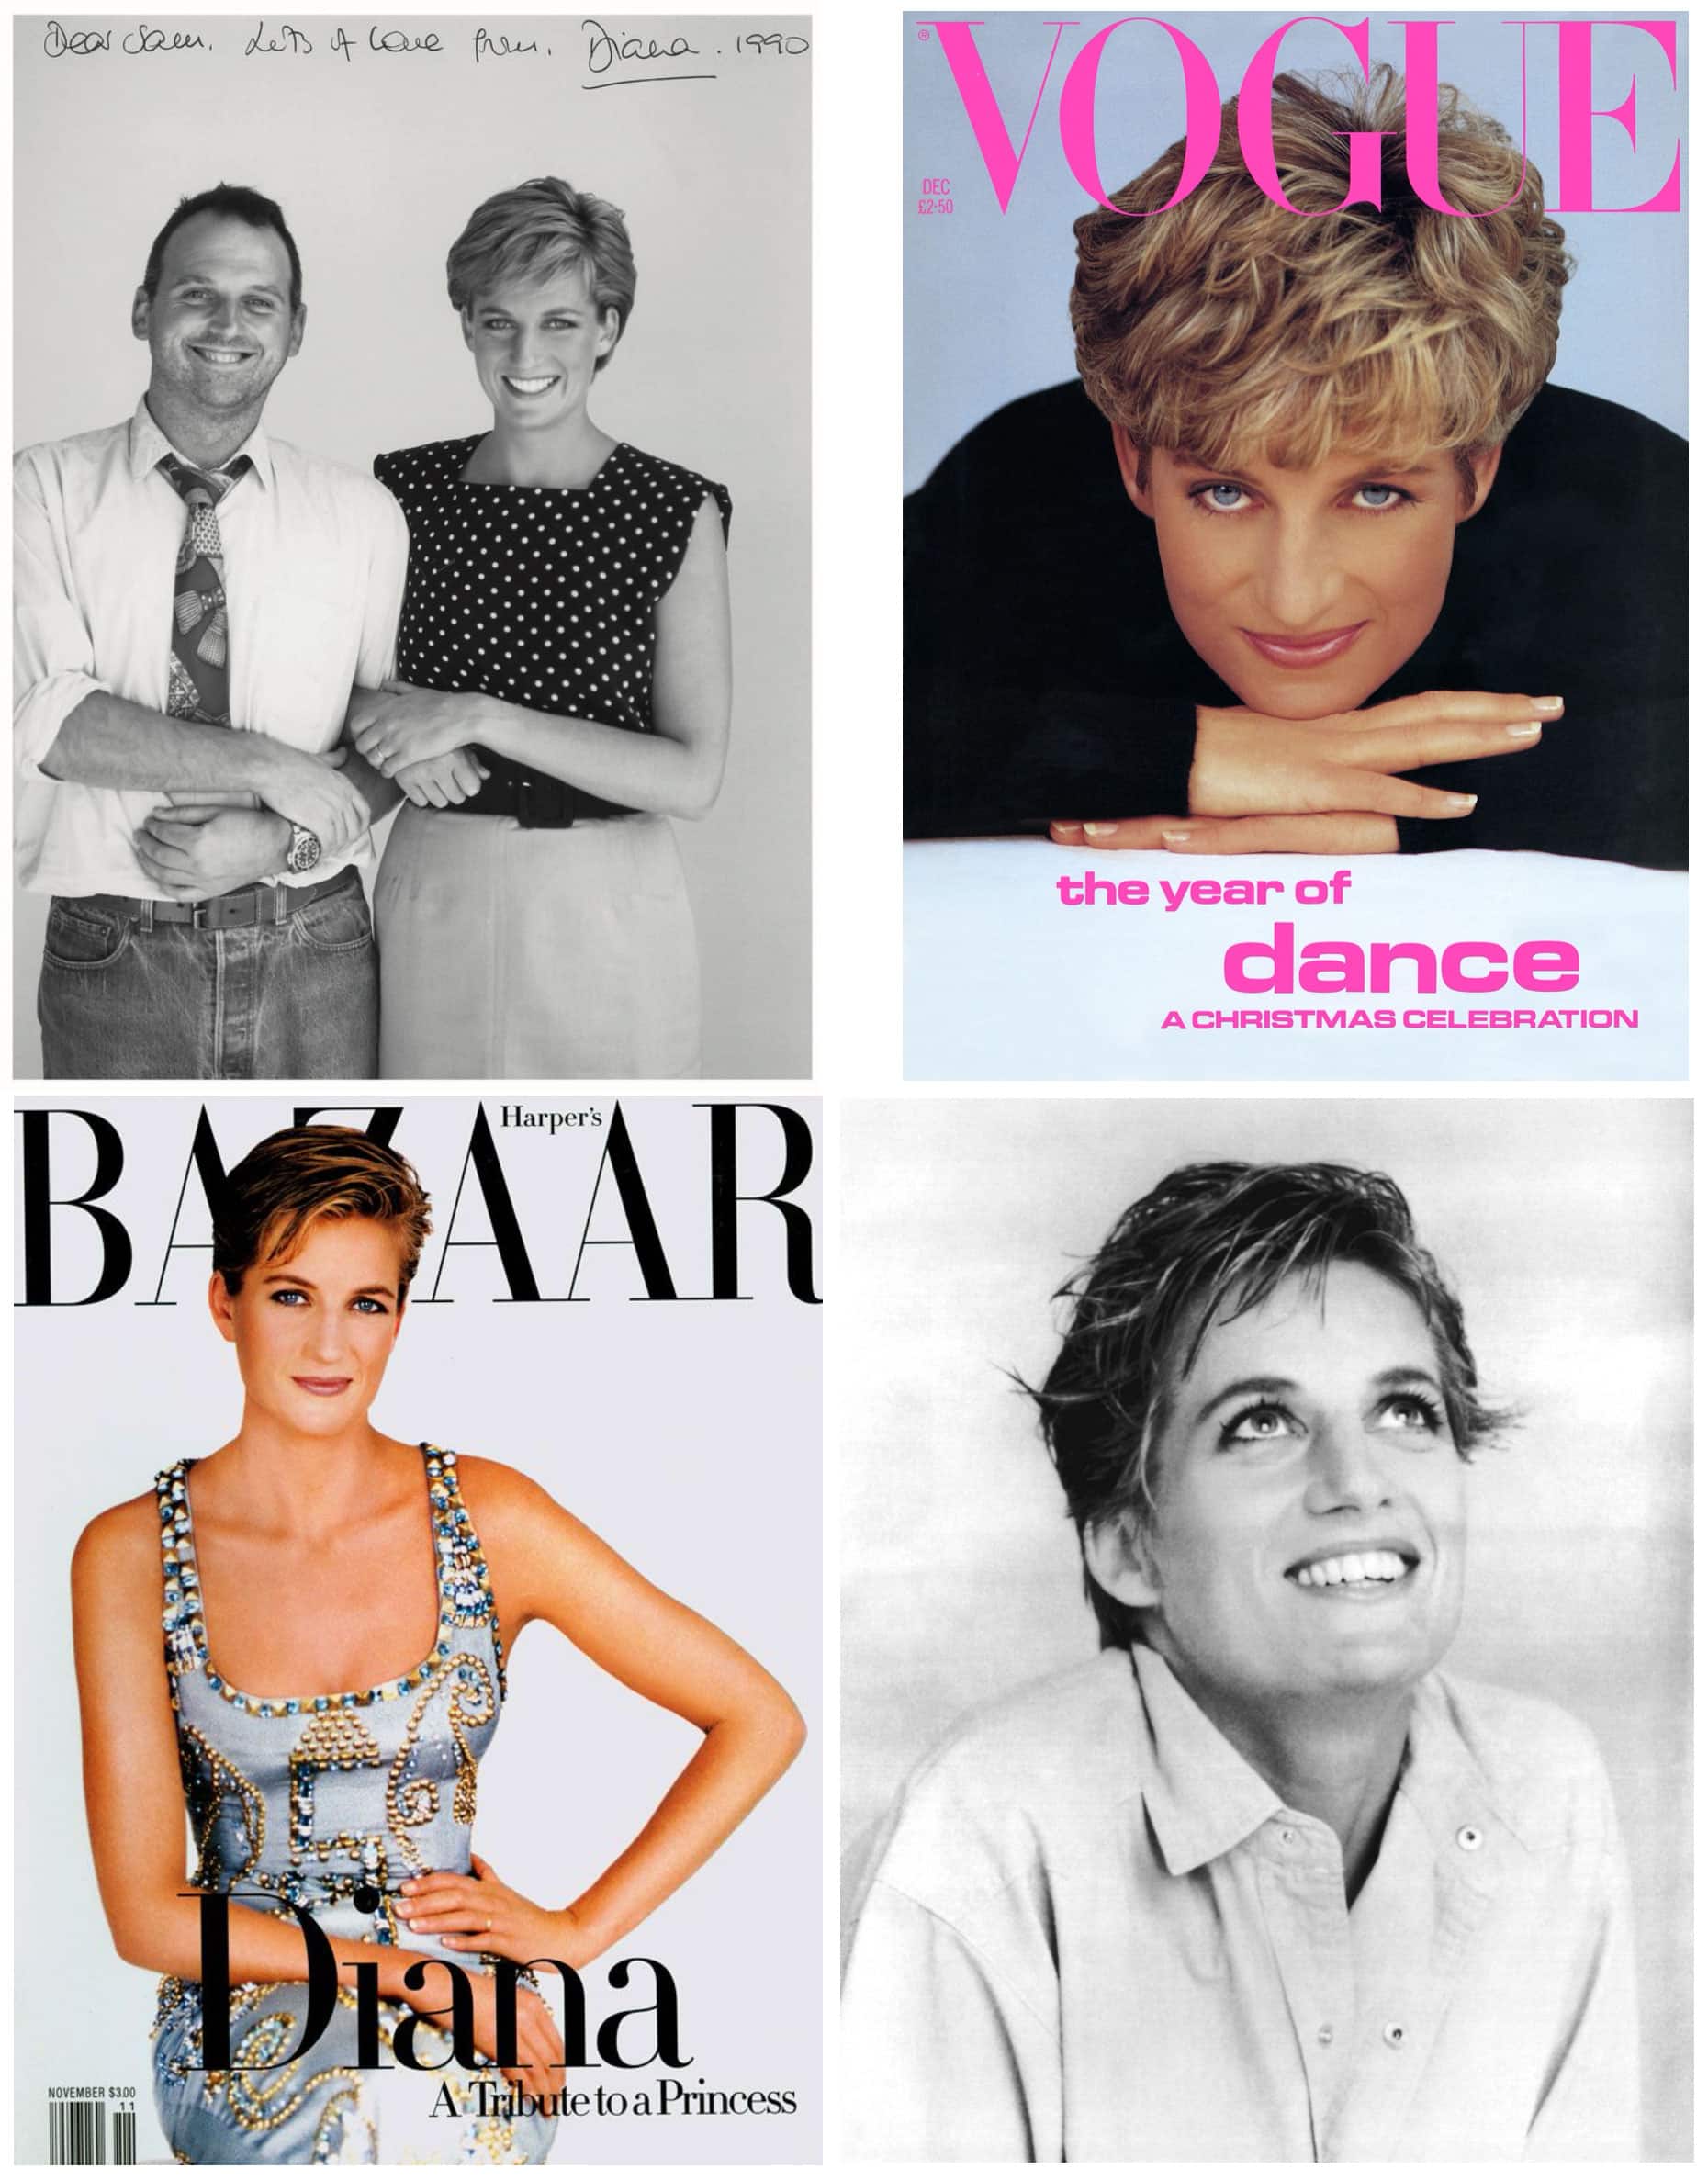 Clockwise from top left:McKnight with Princess Diana, 1990; Princess Diana Vogue cover by Patrick Demarchelier; Princess Diana by Lord Snowdon; Harper’s Bazaar cover by Patrick Demarchelier. All hair by Sam McKnight.